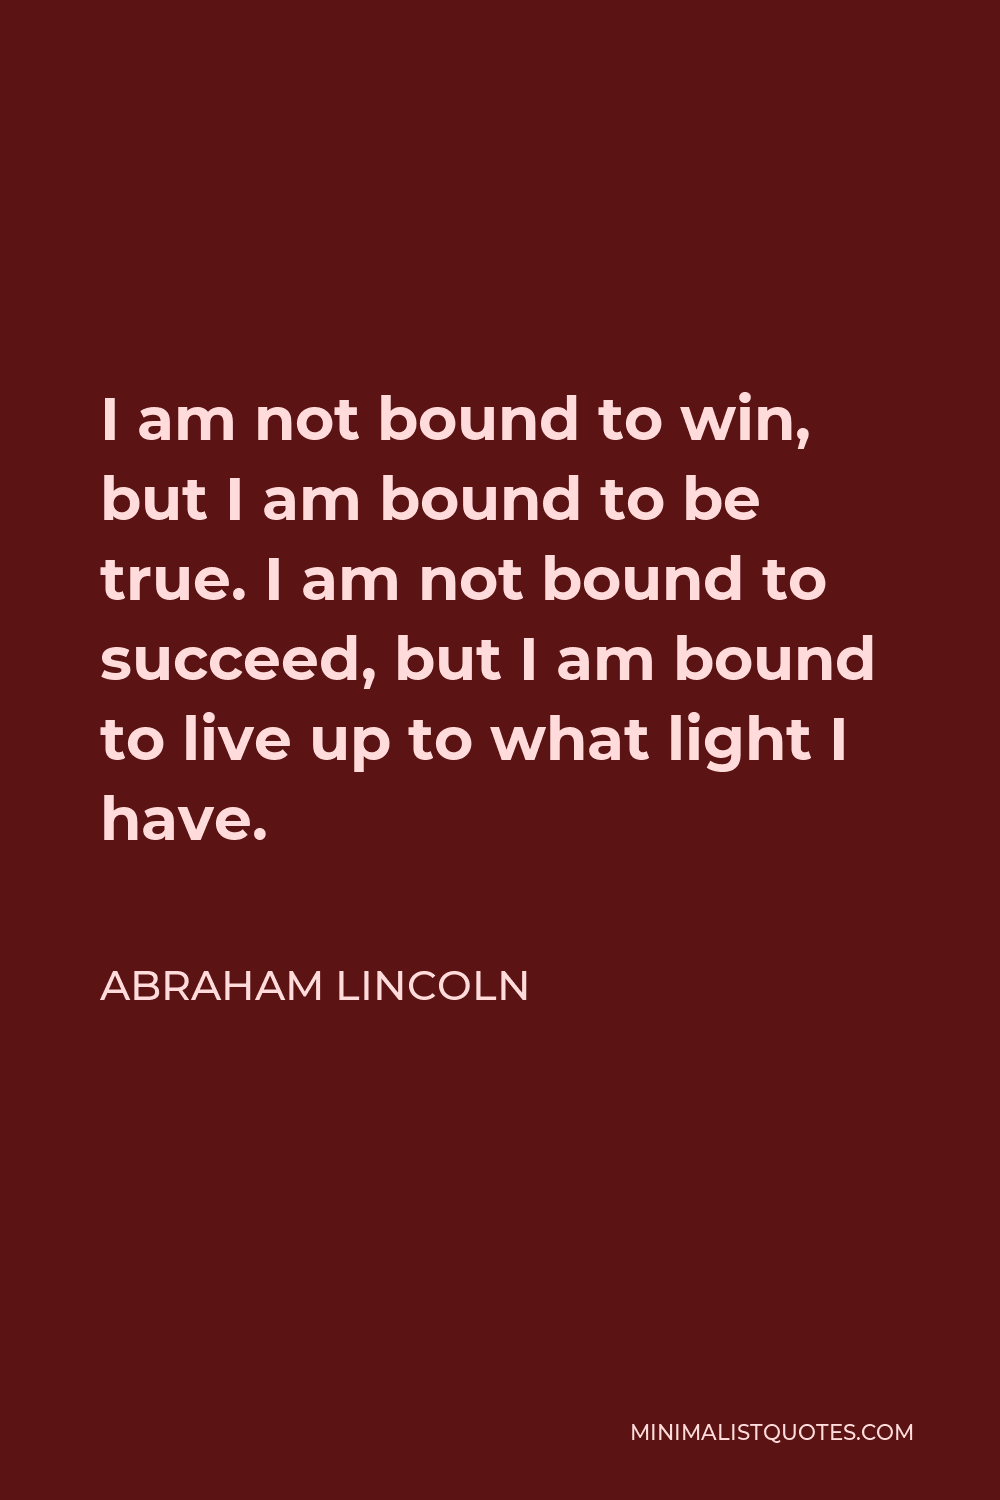 Abraham Lincoln Quote - I am not bound to win, but I am bound to be true. I am not bound to succeed, but I am bound to live up to what light I have.